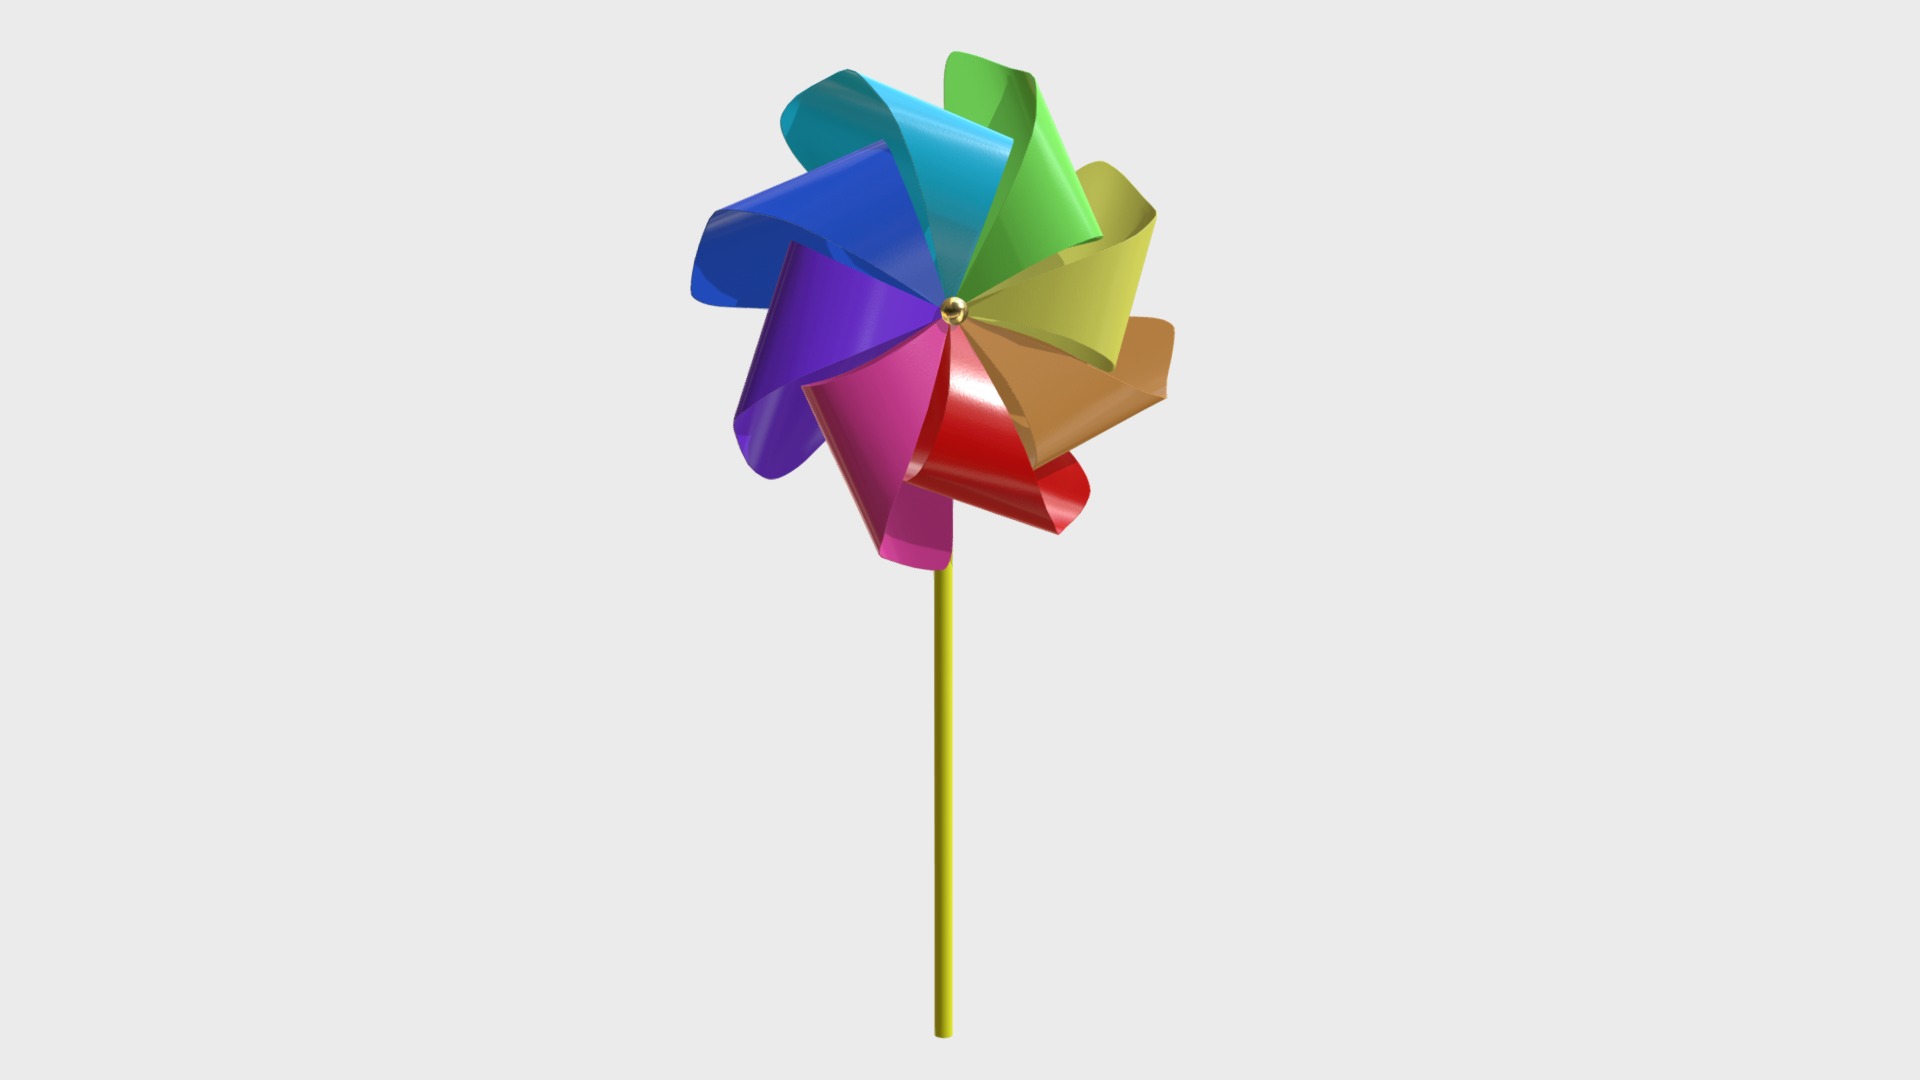 3D model Pinwheel - This is a 3D model of the Pinwheel. The 3D model is about a colorful pinwheel on a stick.